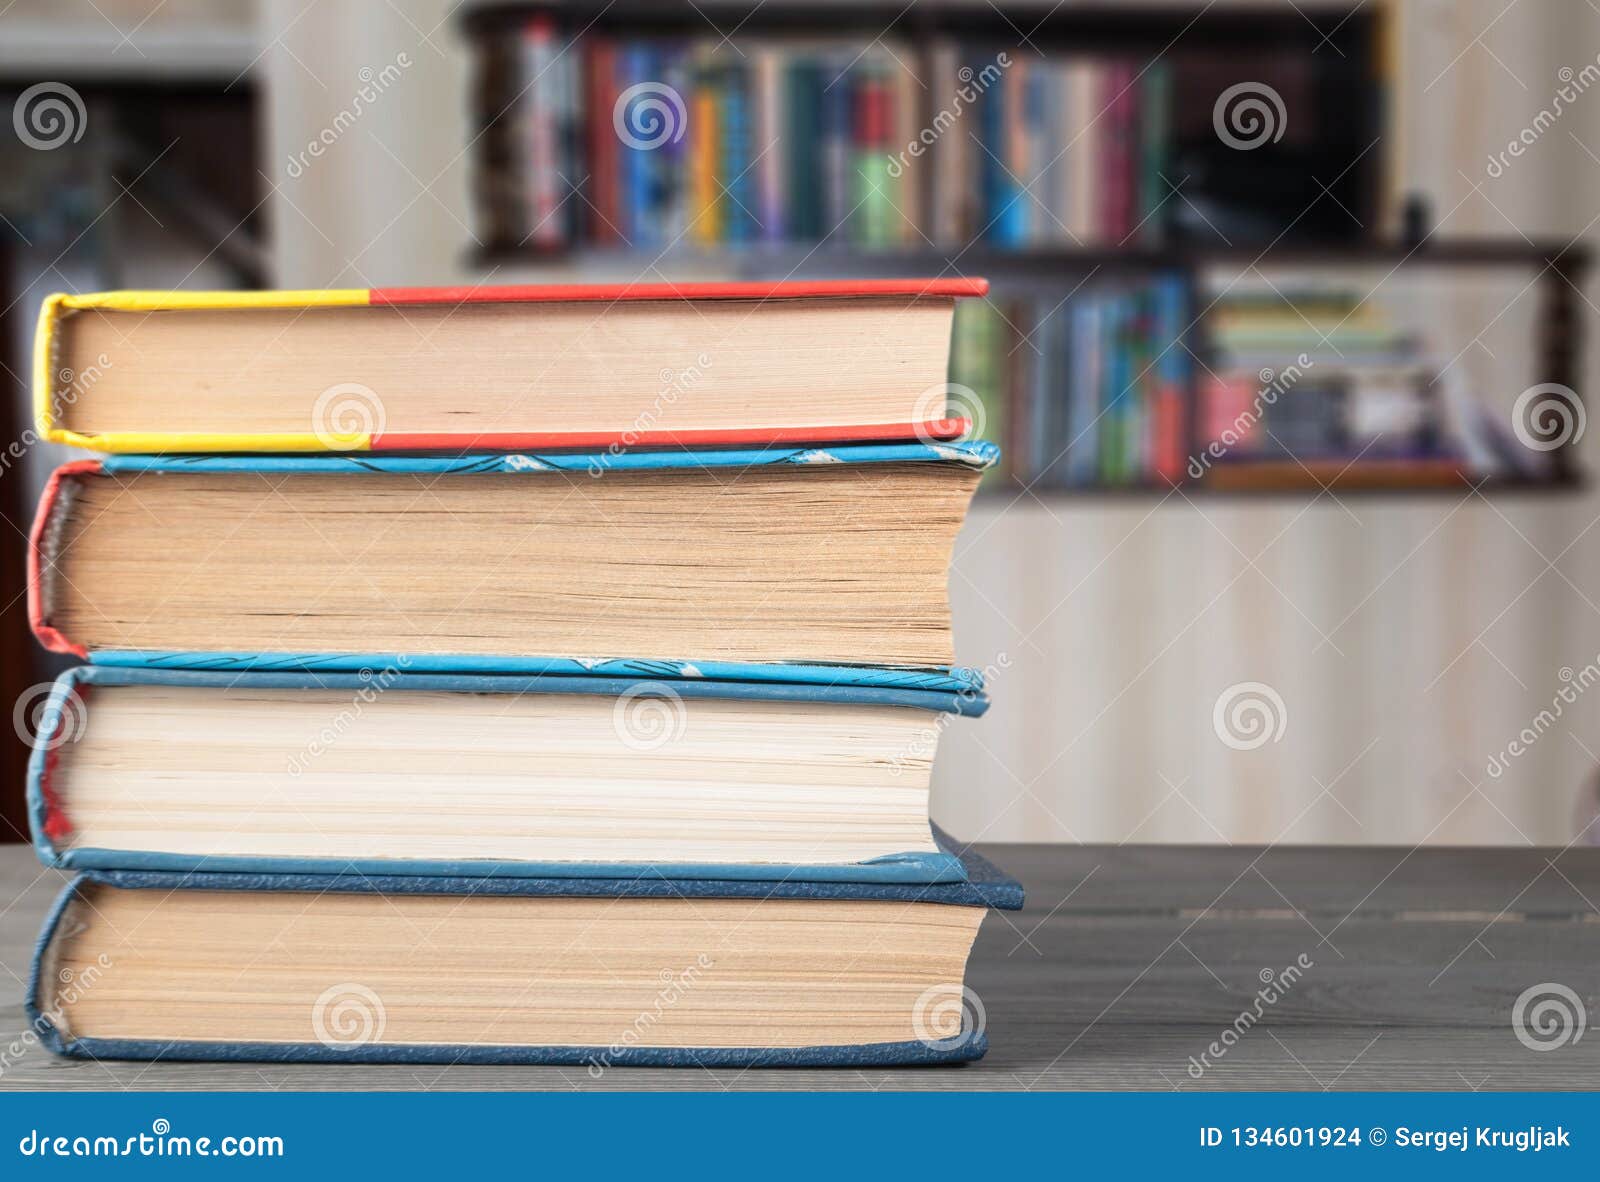 Books On The Table On The Background Of A Bookshelf Stock Photo